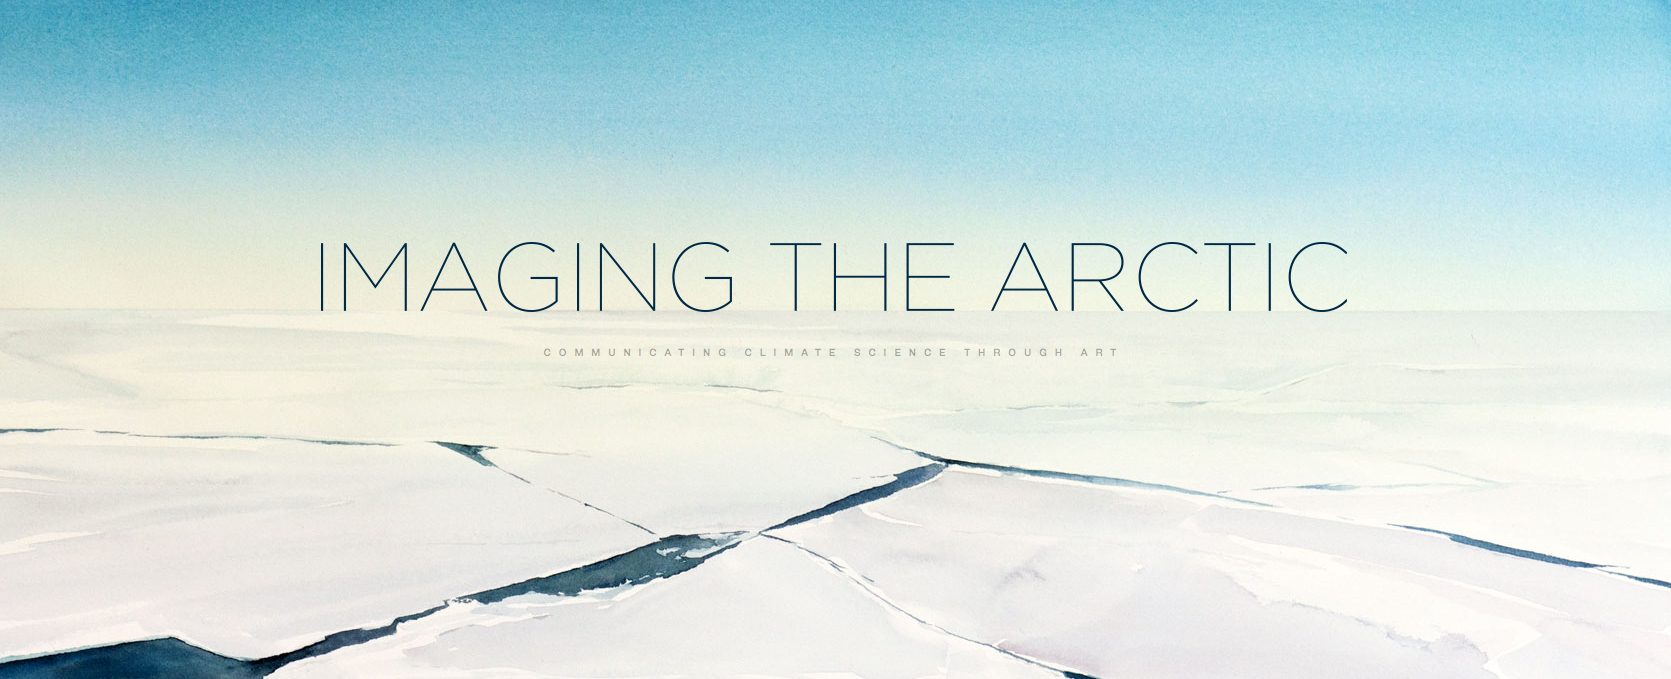 Imaging the Arctic project